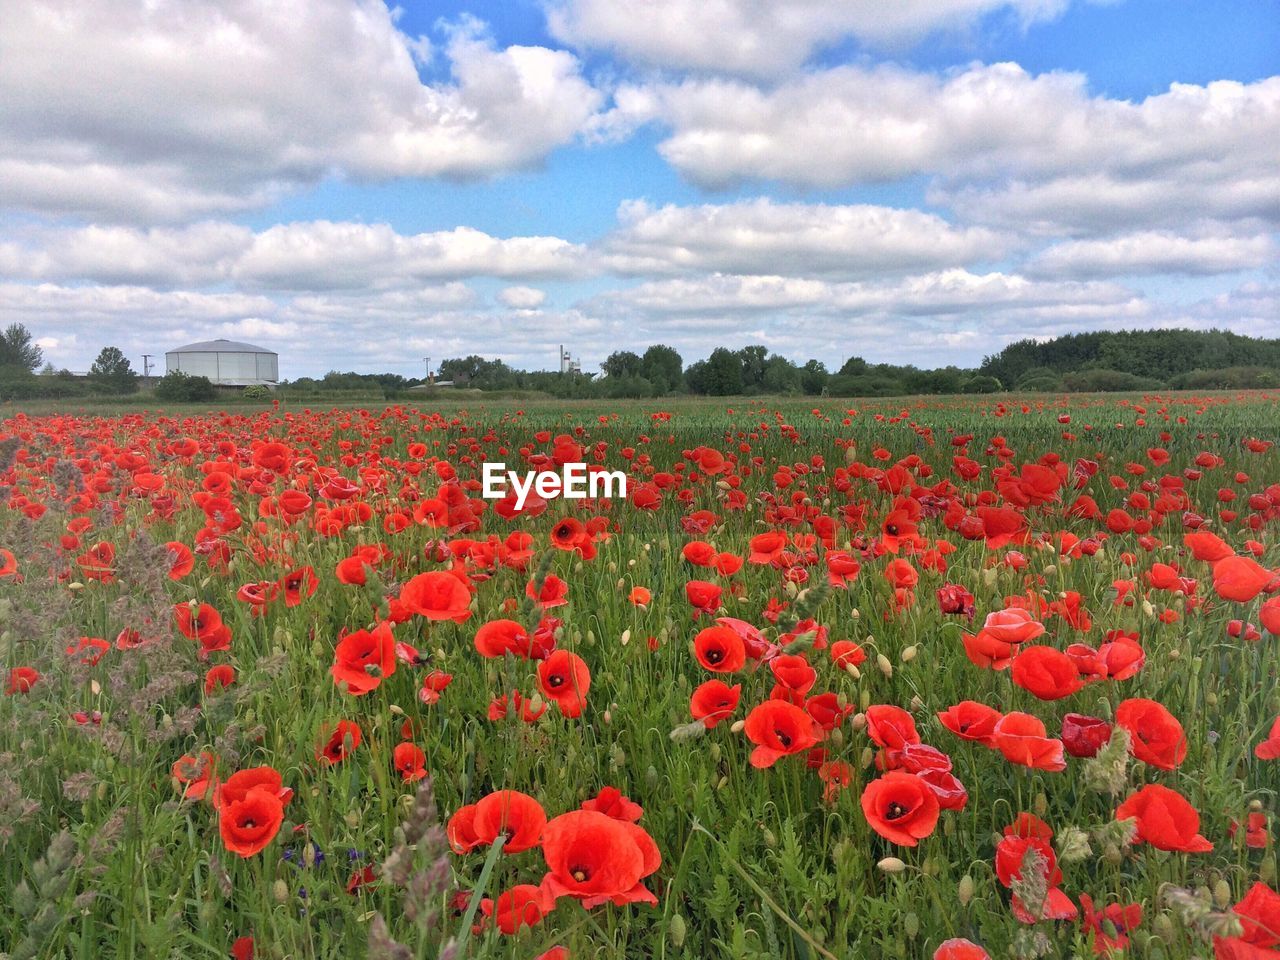 Poppies growing on field against cloudy sky